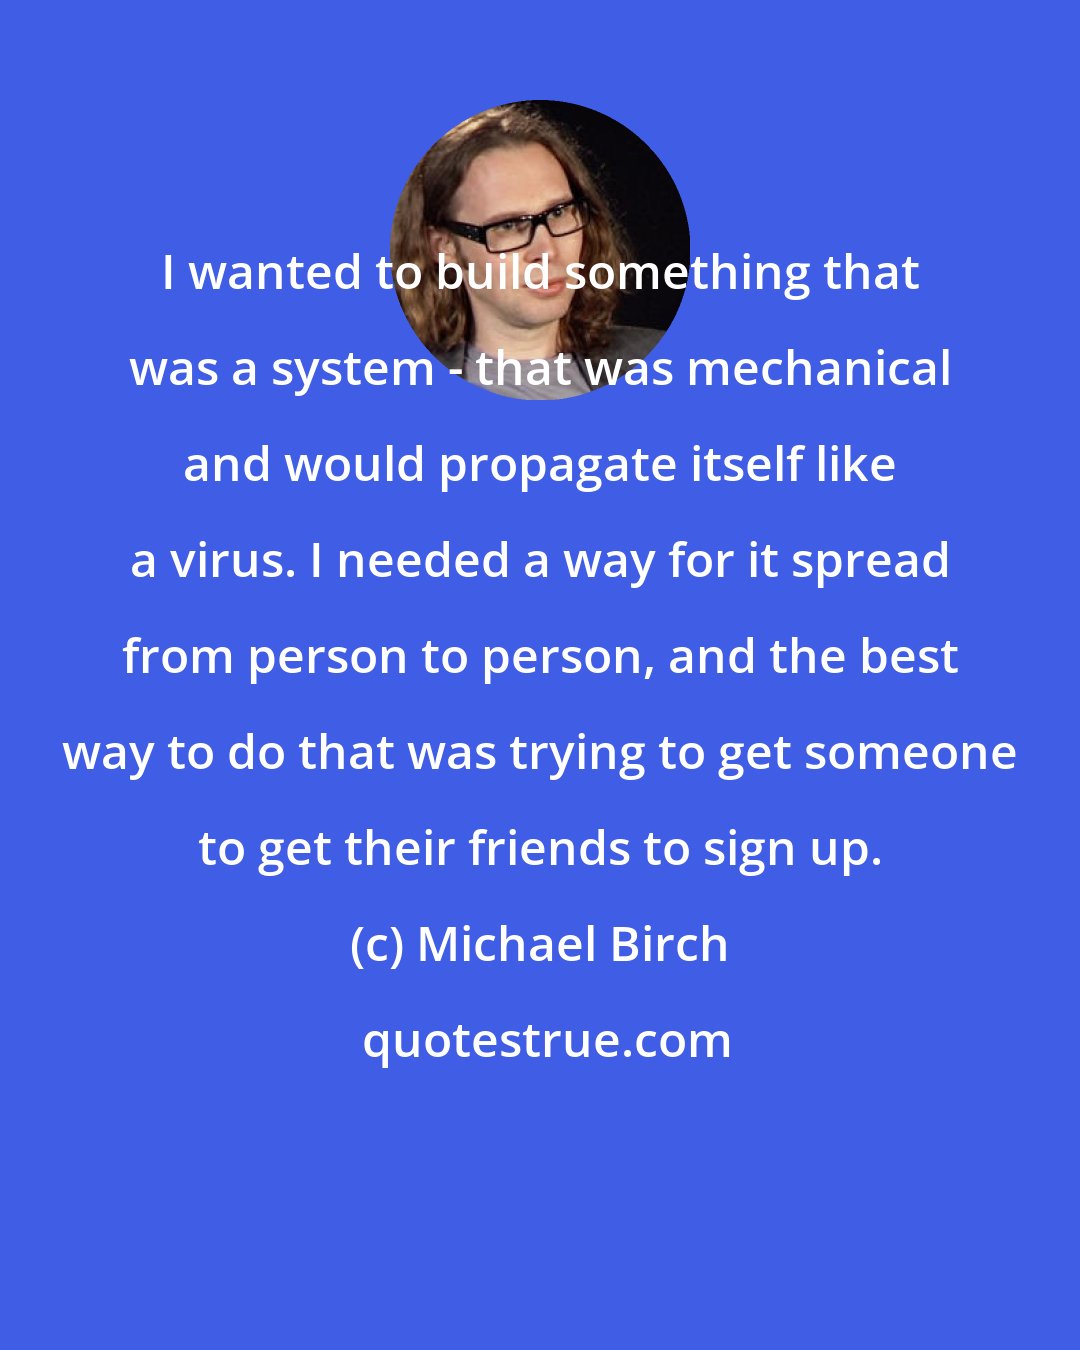 Michael Birch: I wanted to build something that was a system - that was mechanical and would propagate itself like a virus. I needed a way for it spread from person to person, and the best way to do that was trying to get someone to get their friends to sign up.